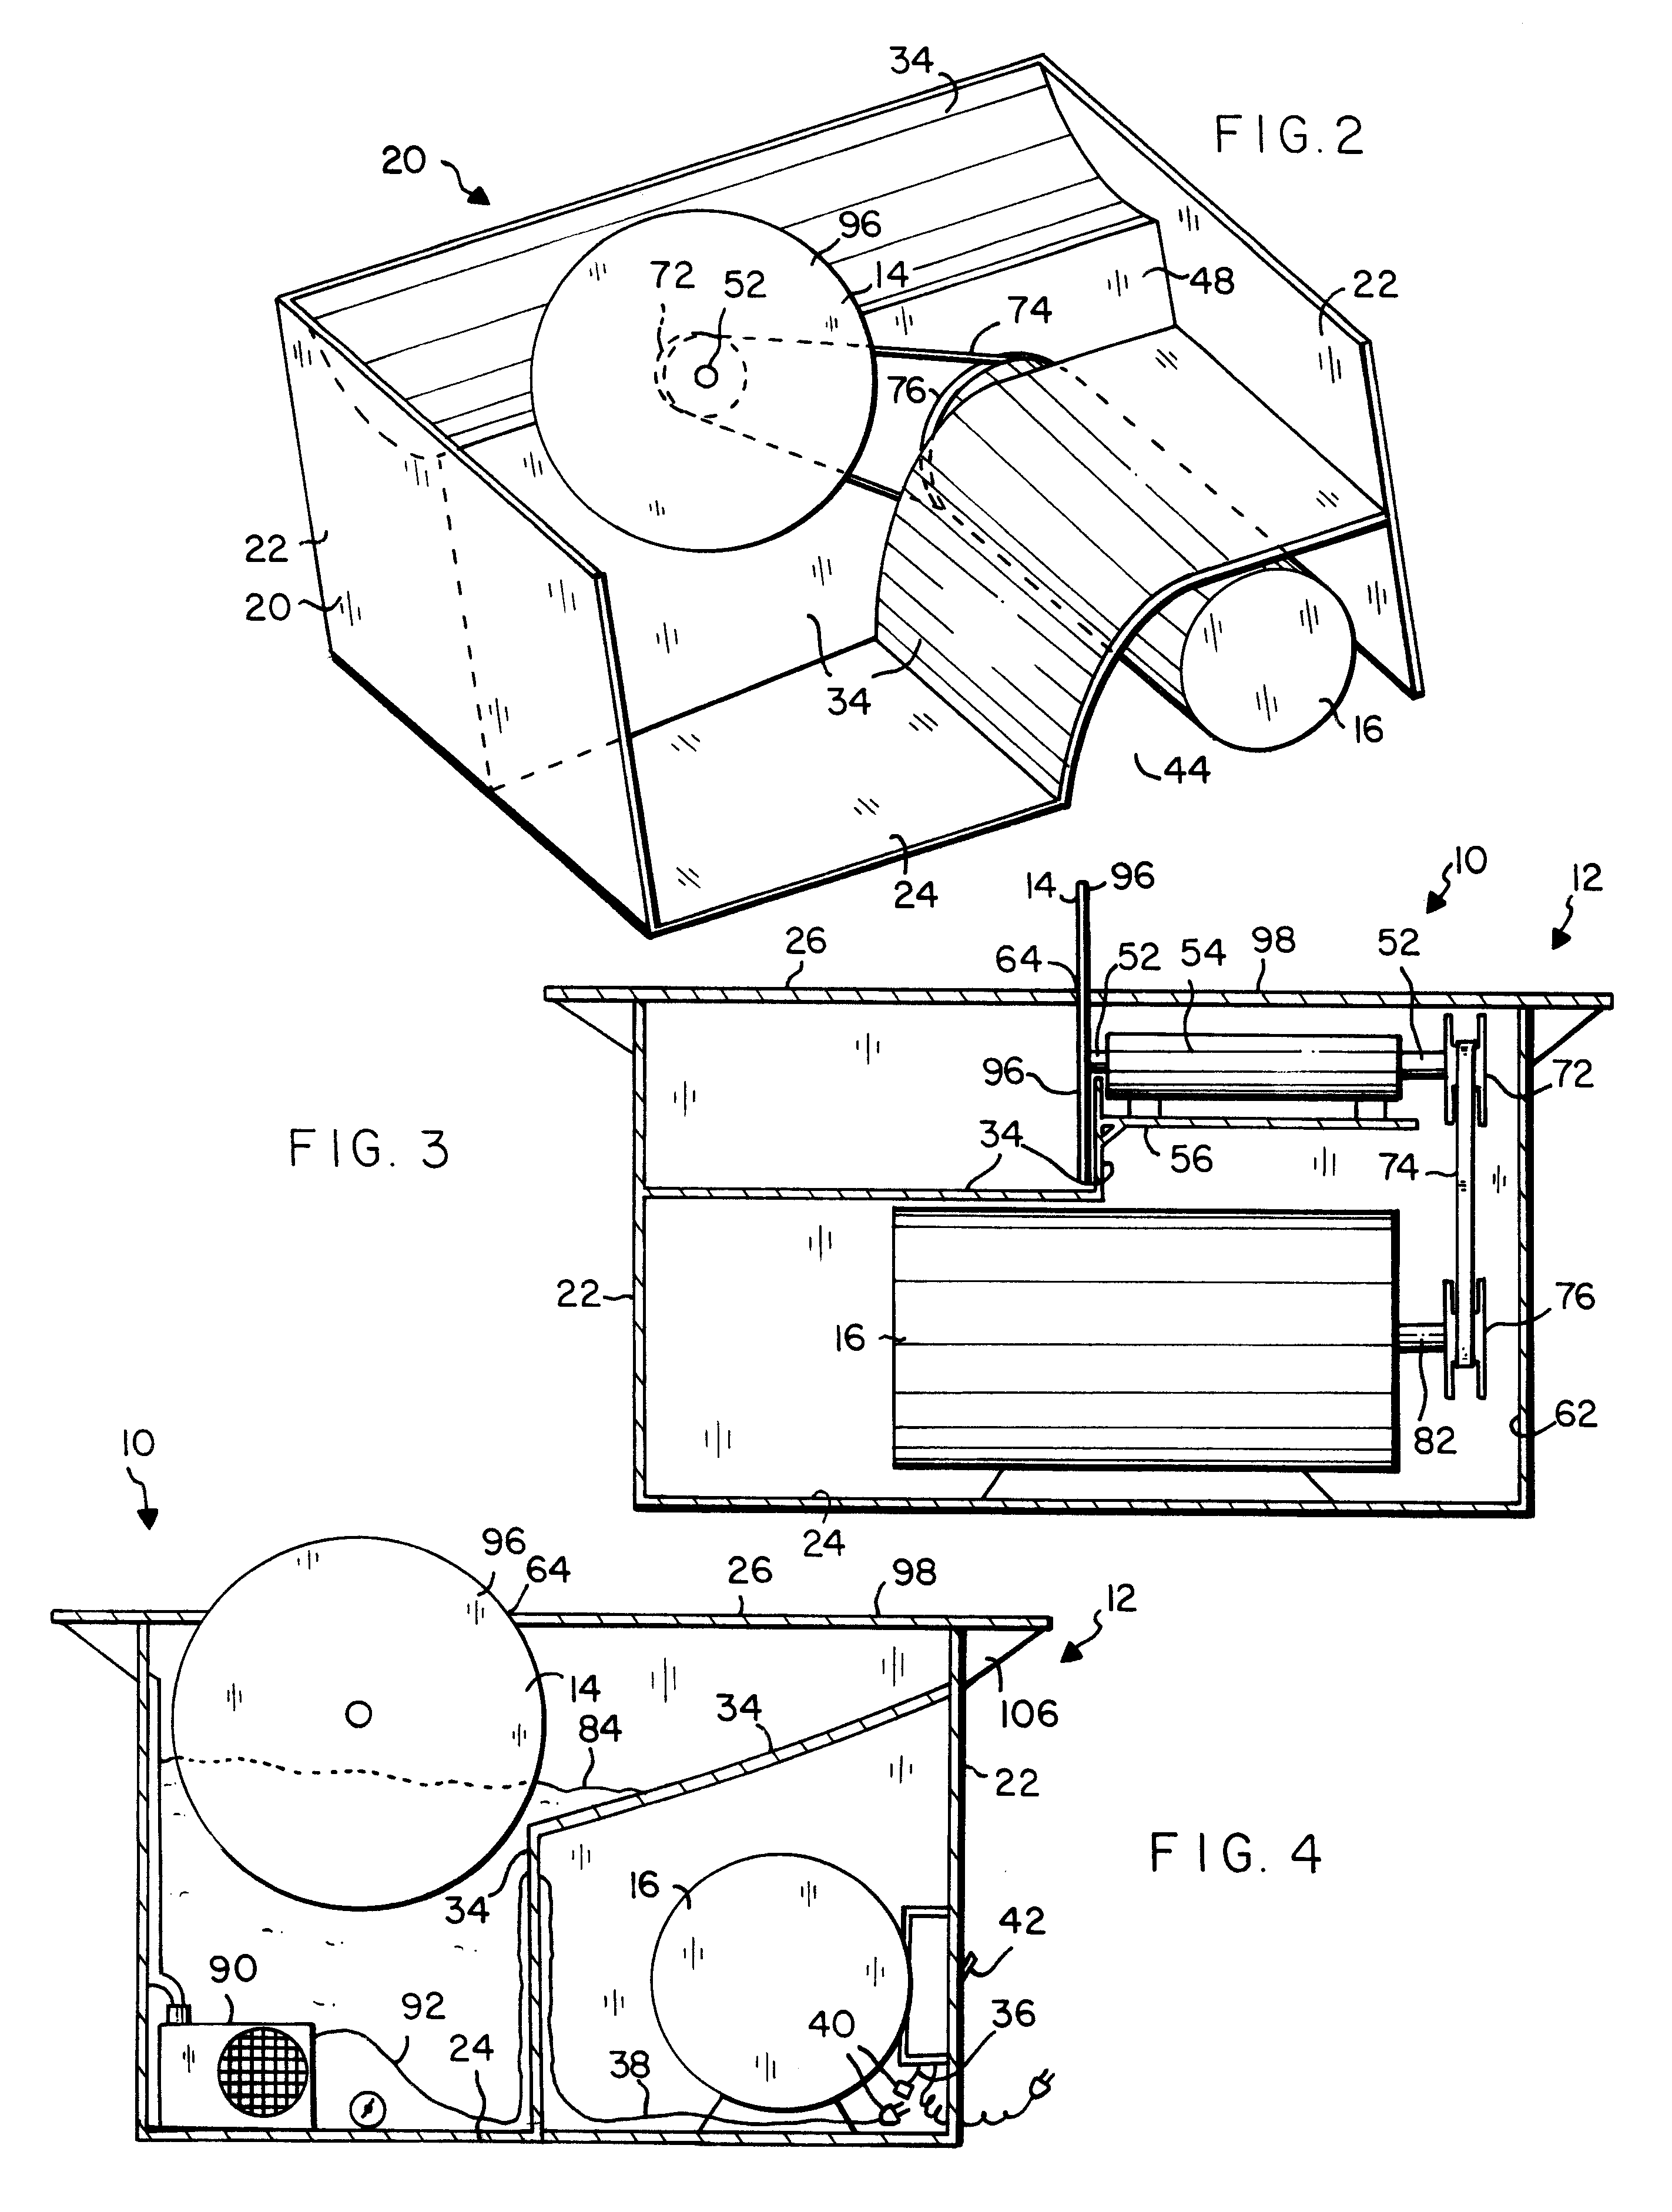 Stone and tile table saw apparatus